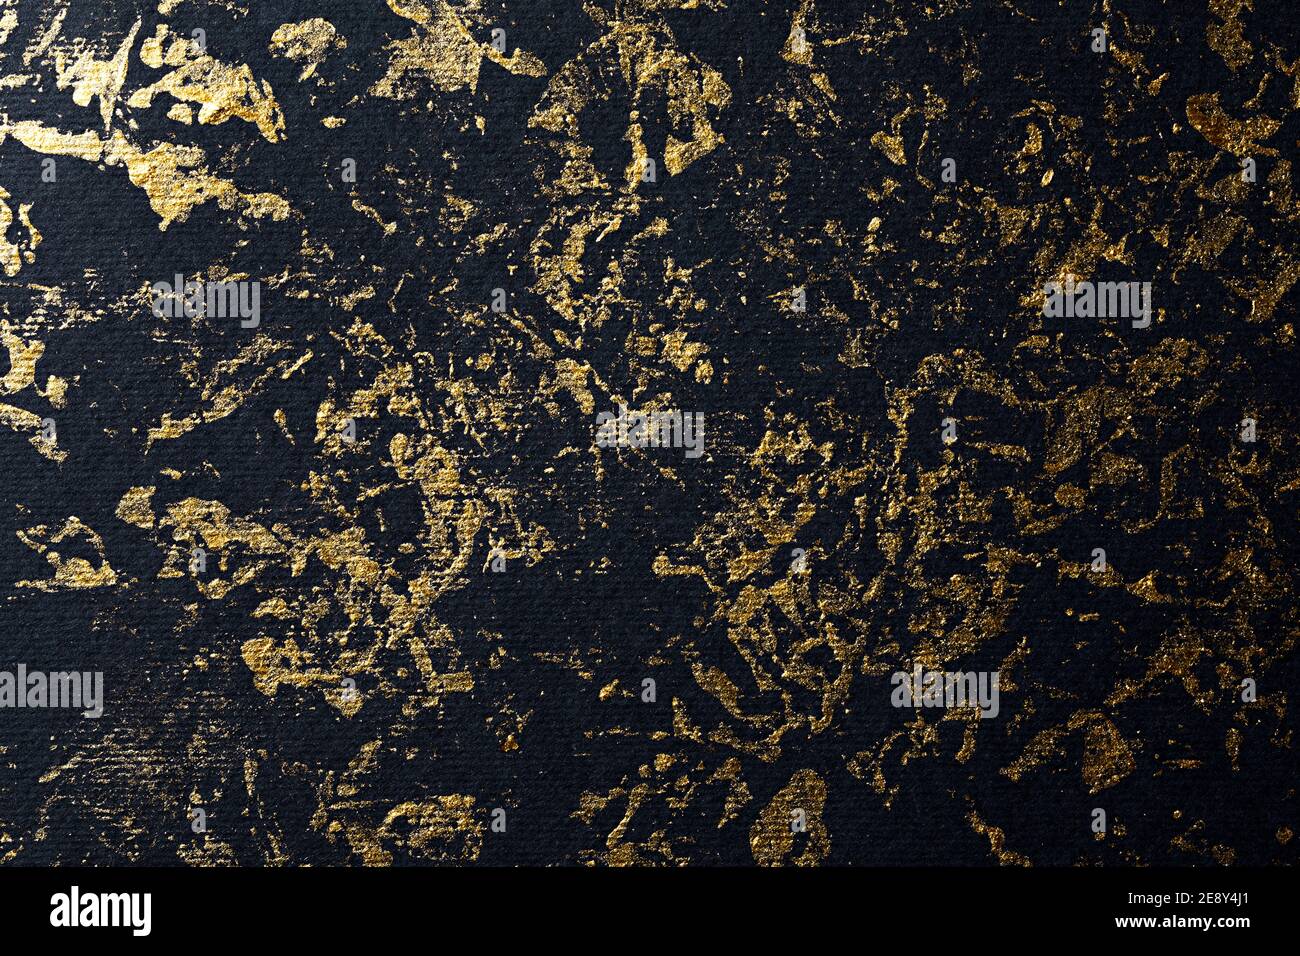 Abstract gold paint on black textured paper Stock Photo